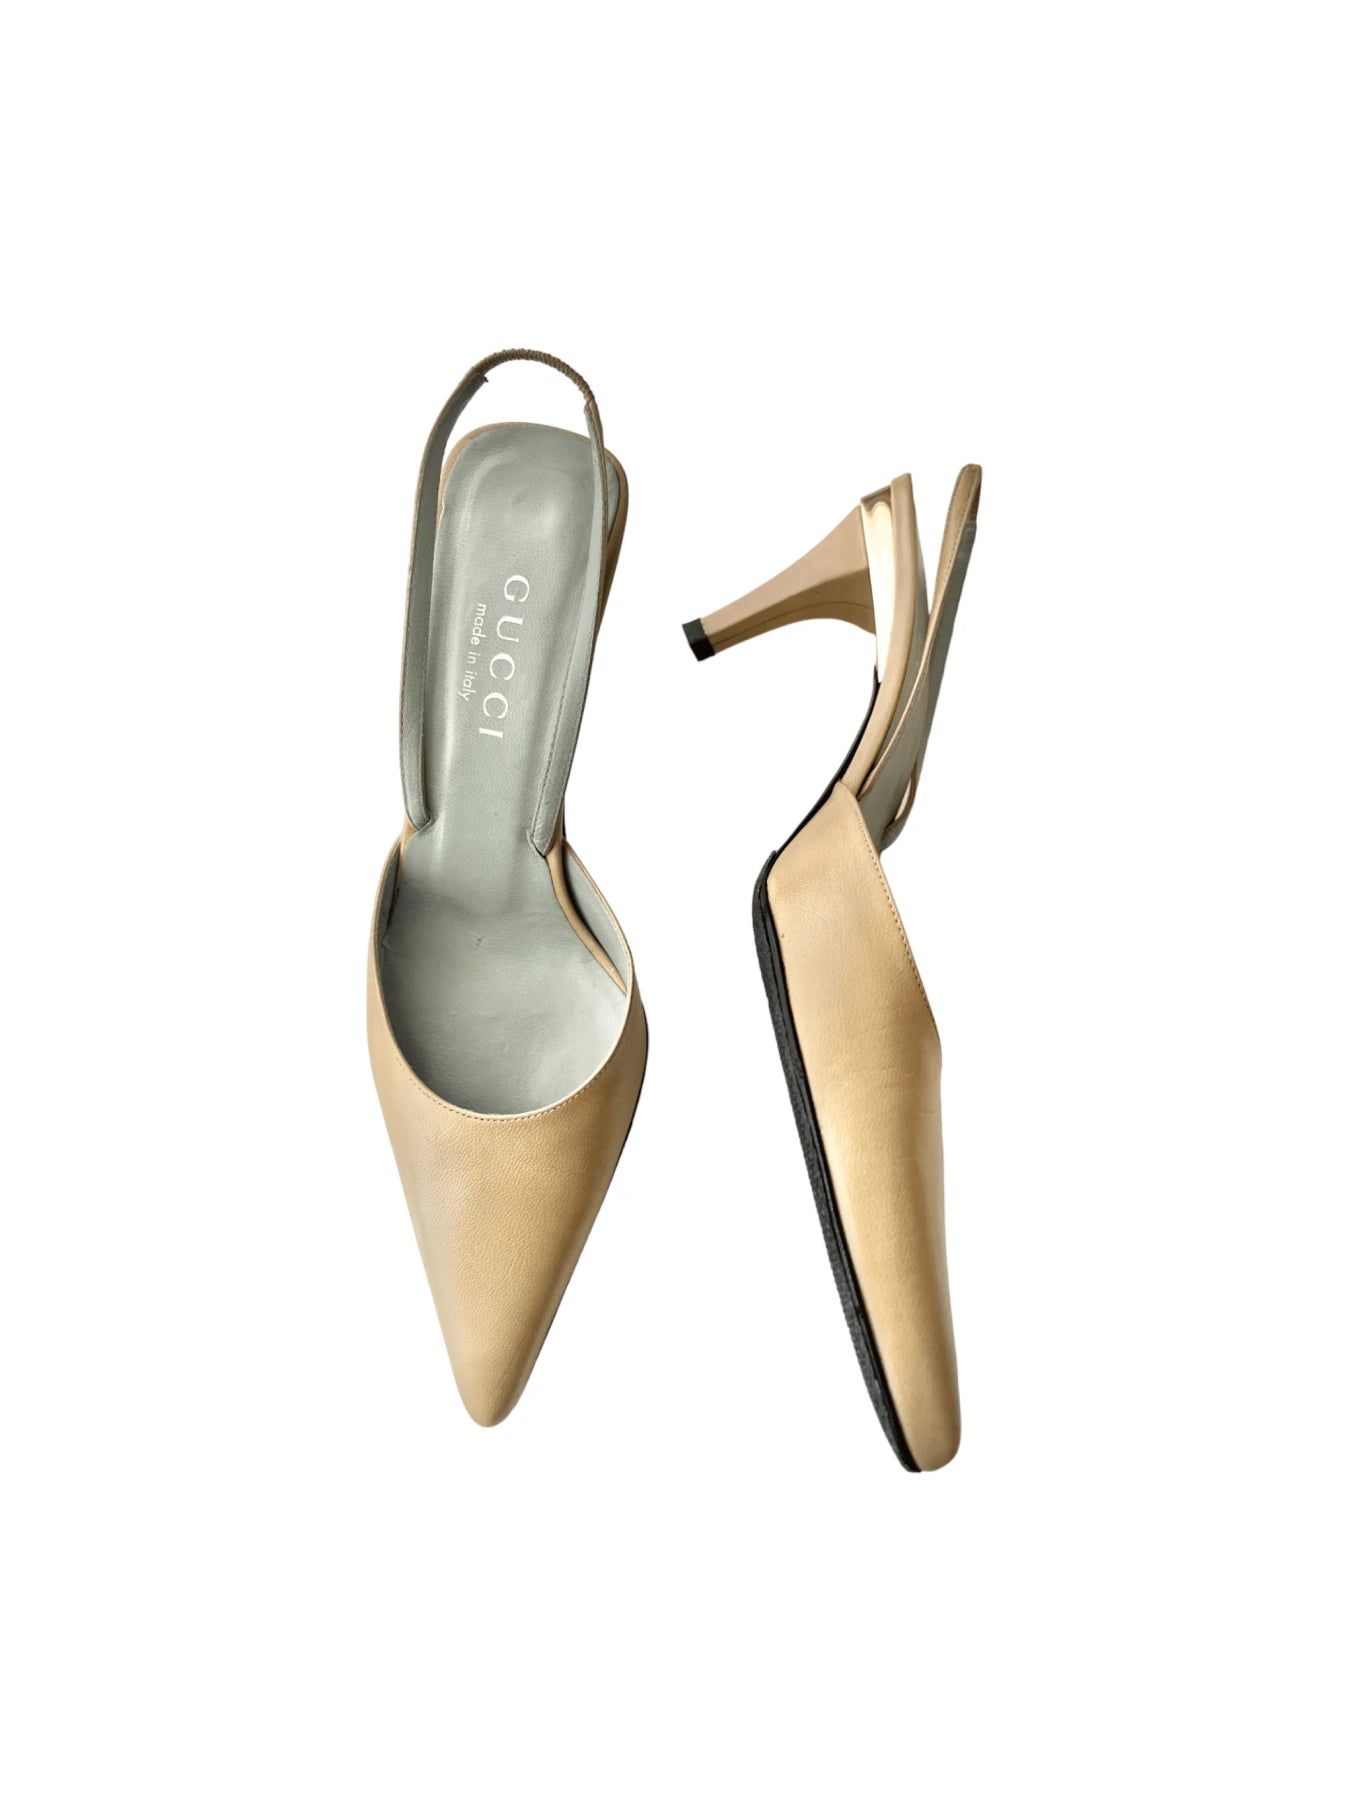 Gucci Slingback Beige Tan Heels With Gold Bands, 36